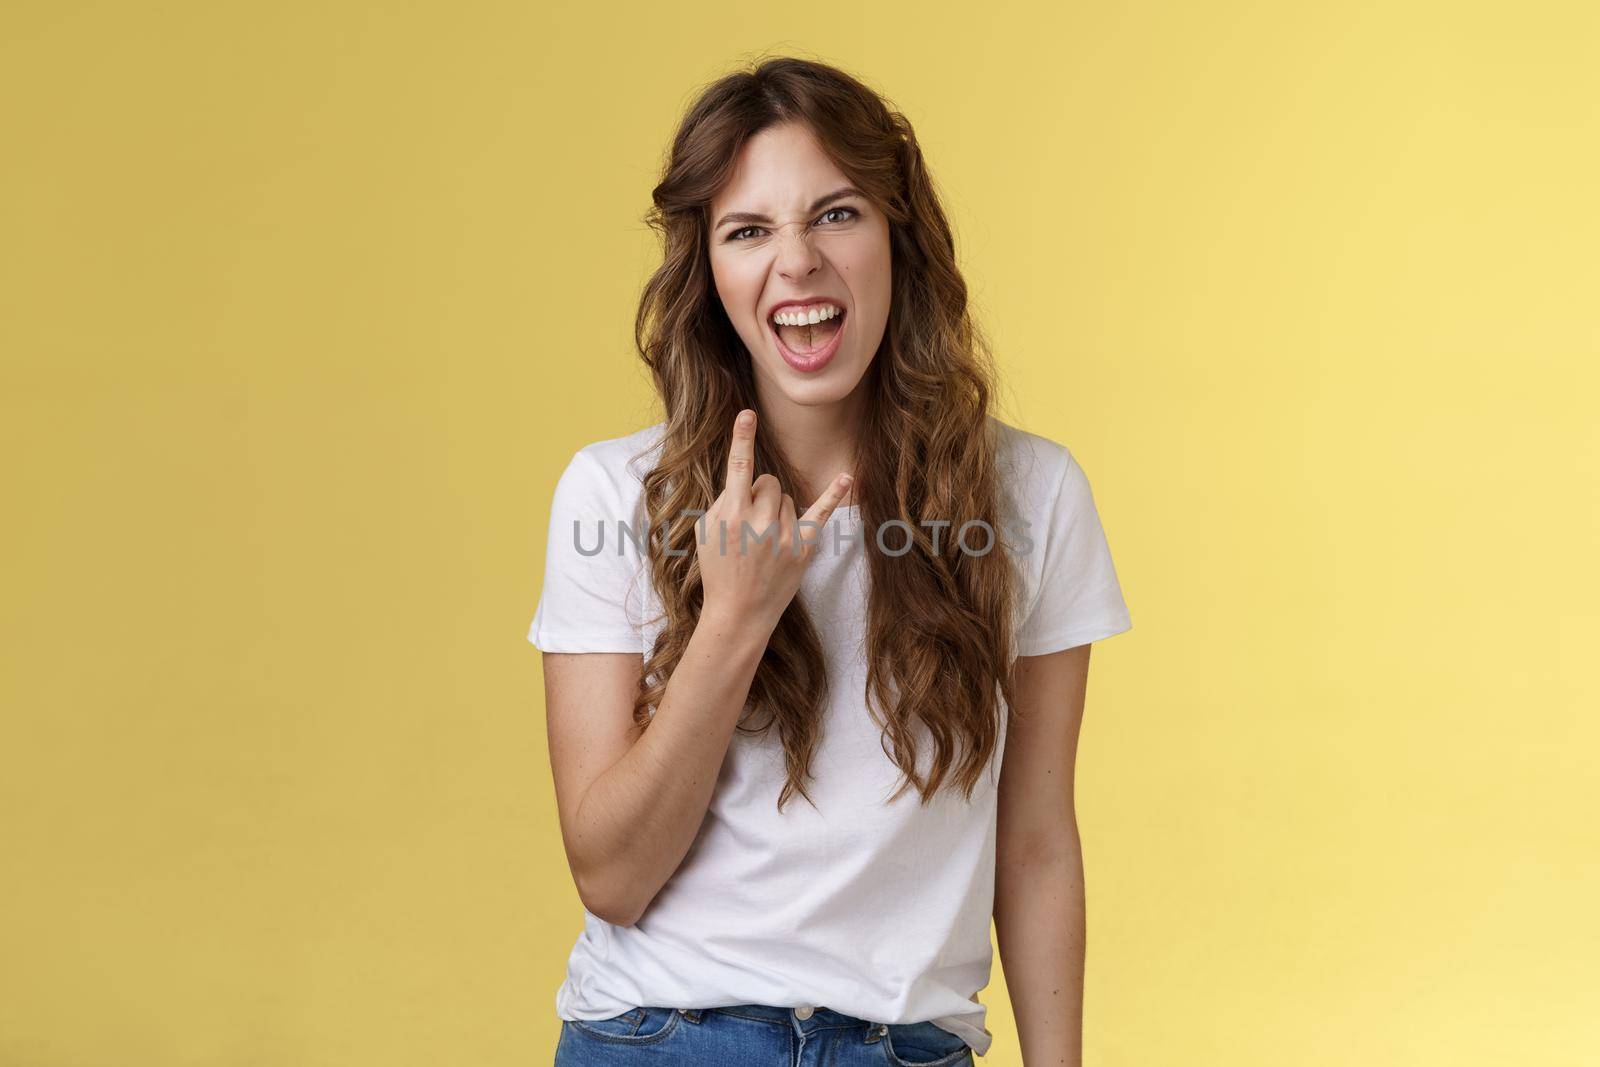 Oh yes fire up party awesome. Joyful daring good-looking sassy caucasian female music festival fun having fun enjoy cool heavy-metal concert grimacing confident stand yellow background.